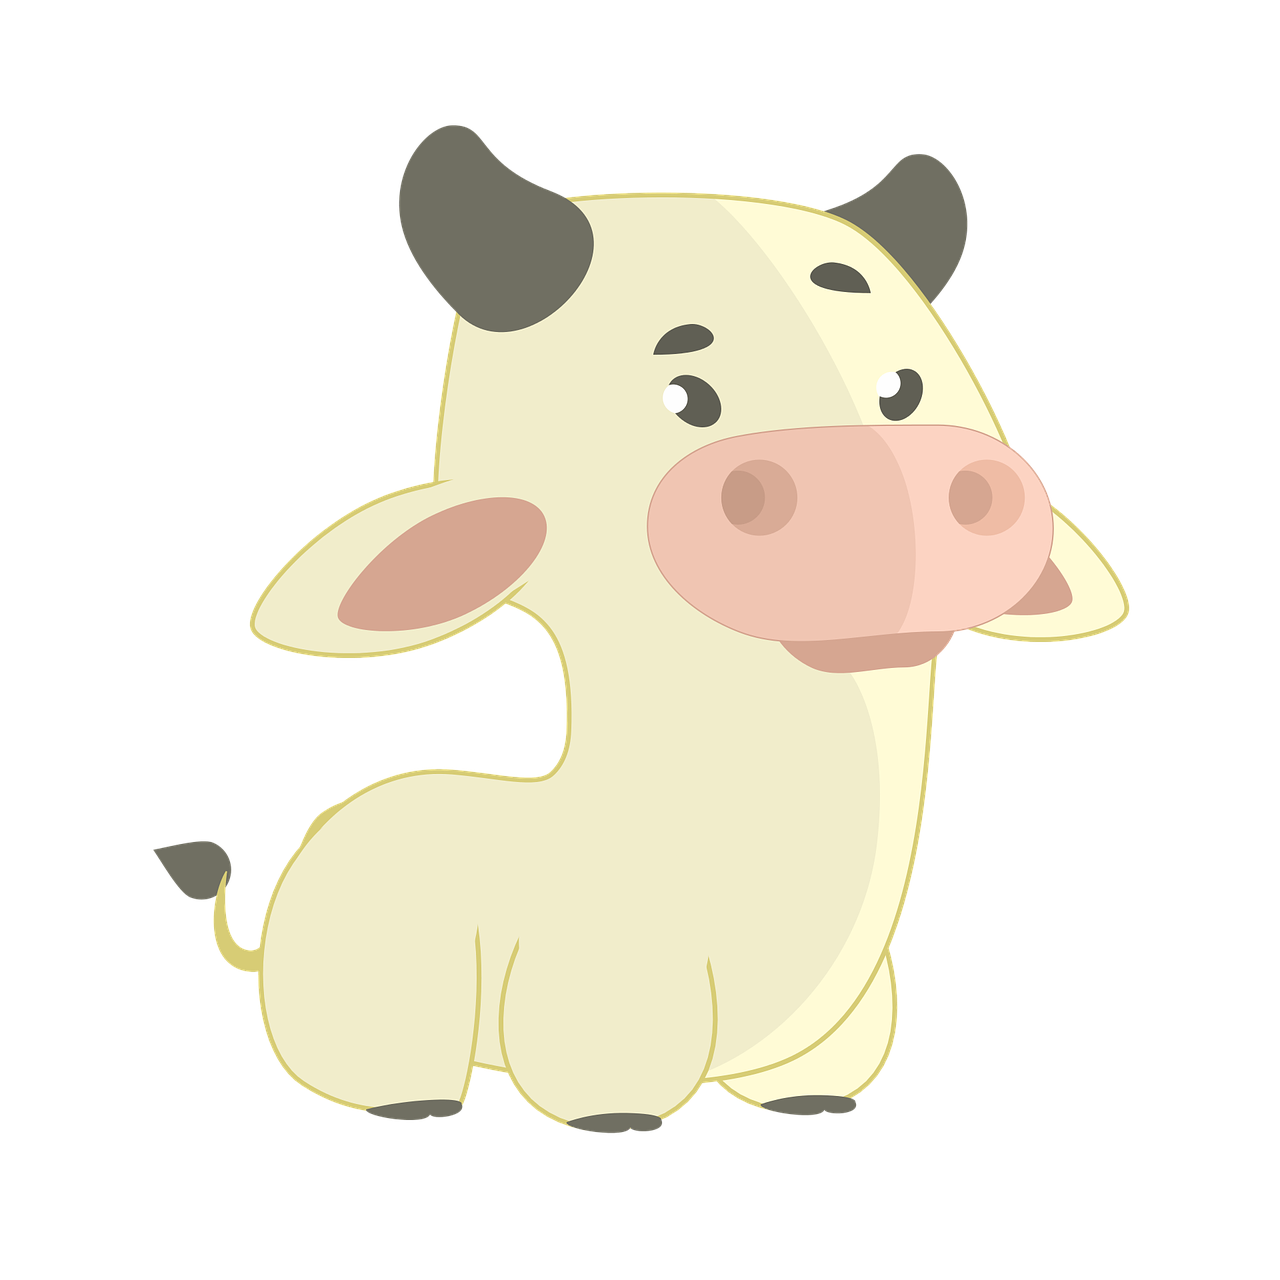 a cartoon cow standing in front of a black background, an illustration of, mingei, soft anime illustration, ivory, style of cute pokemon, accurate illustration